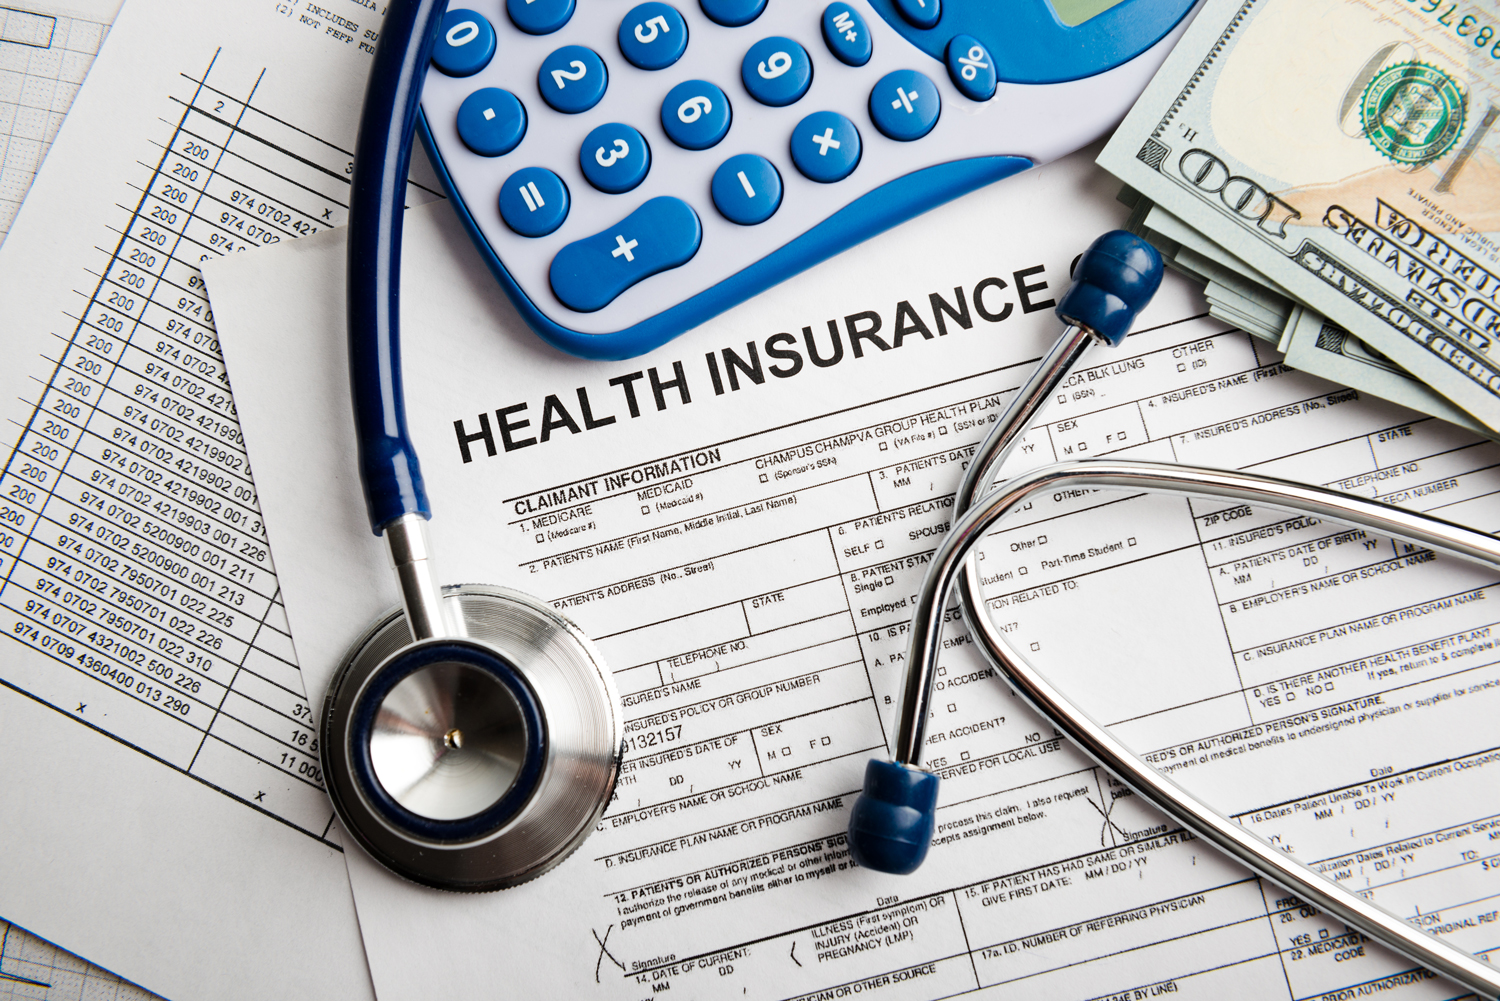 Health Insurance form, stethoscope, calculator and dollars